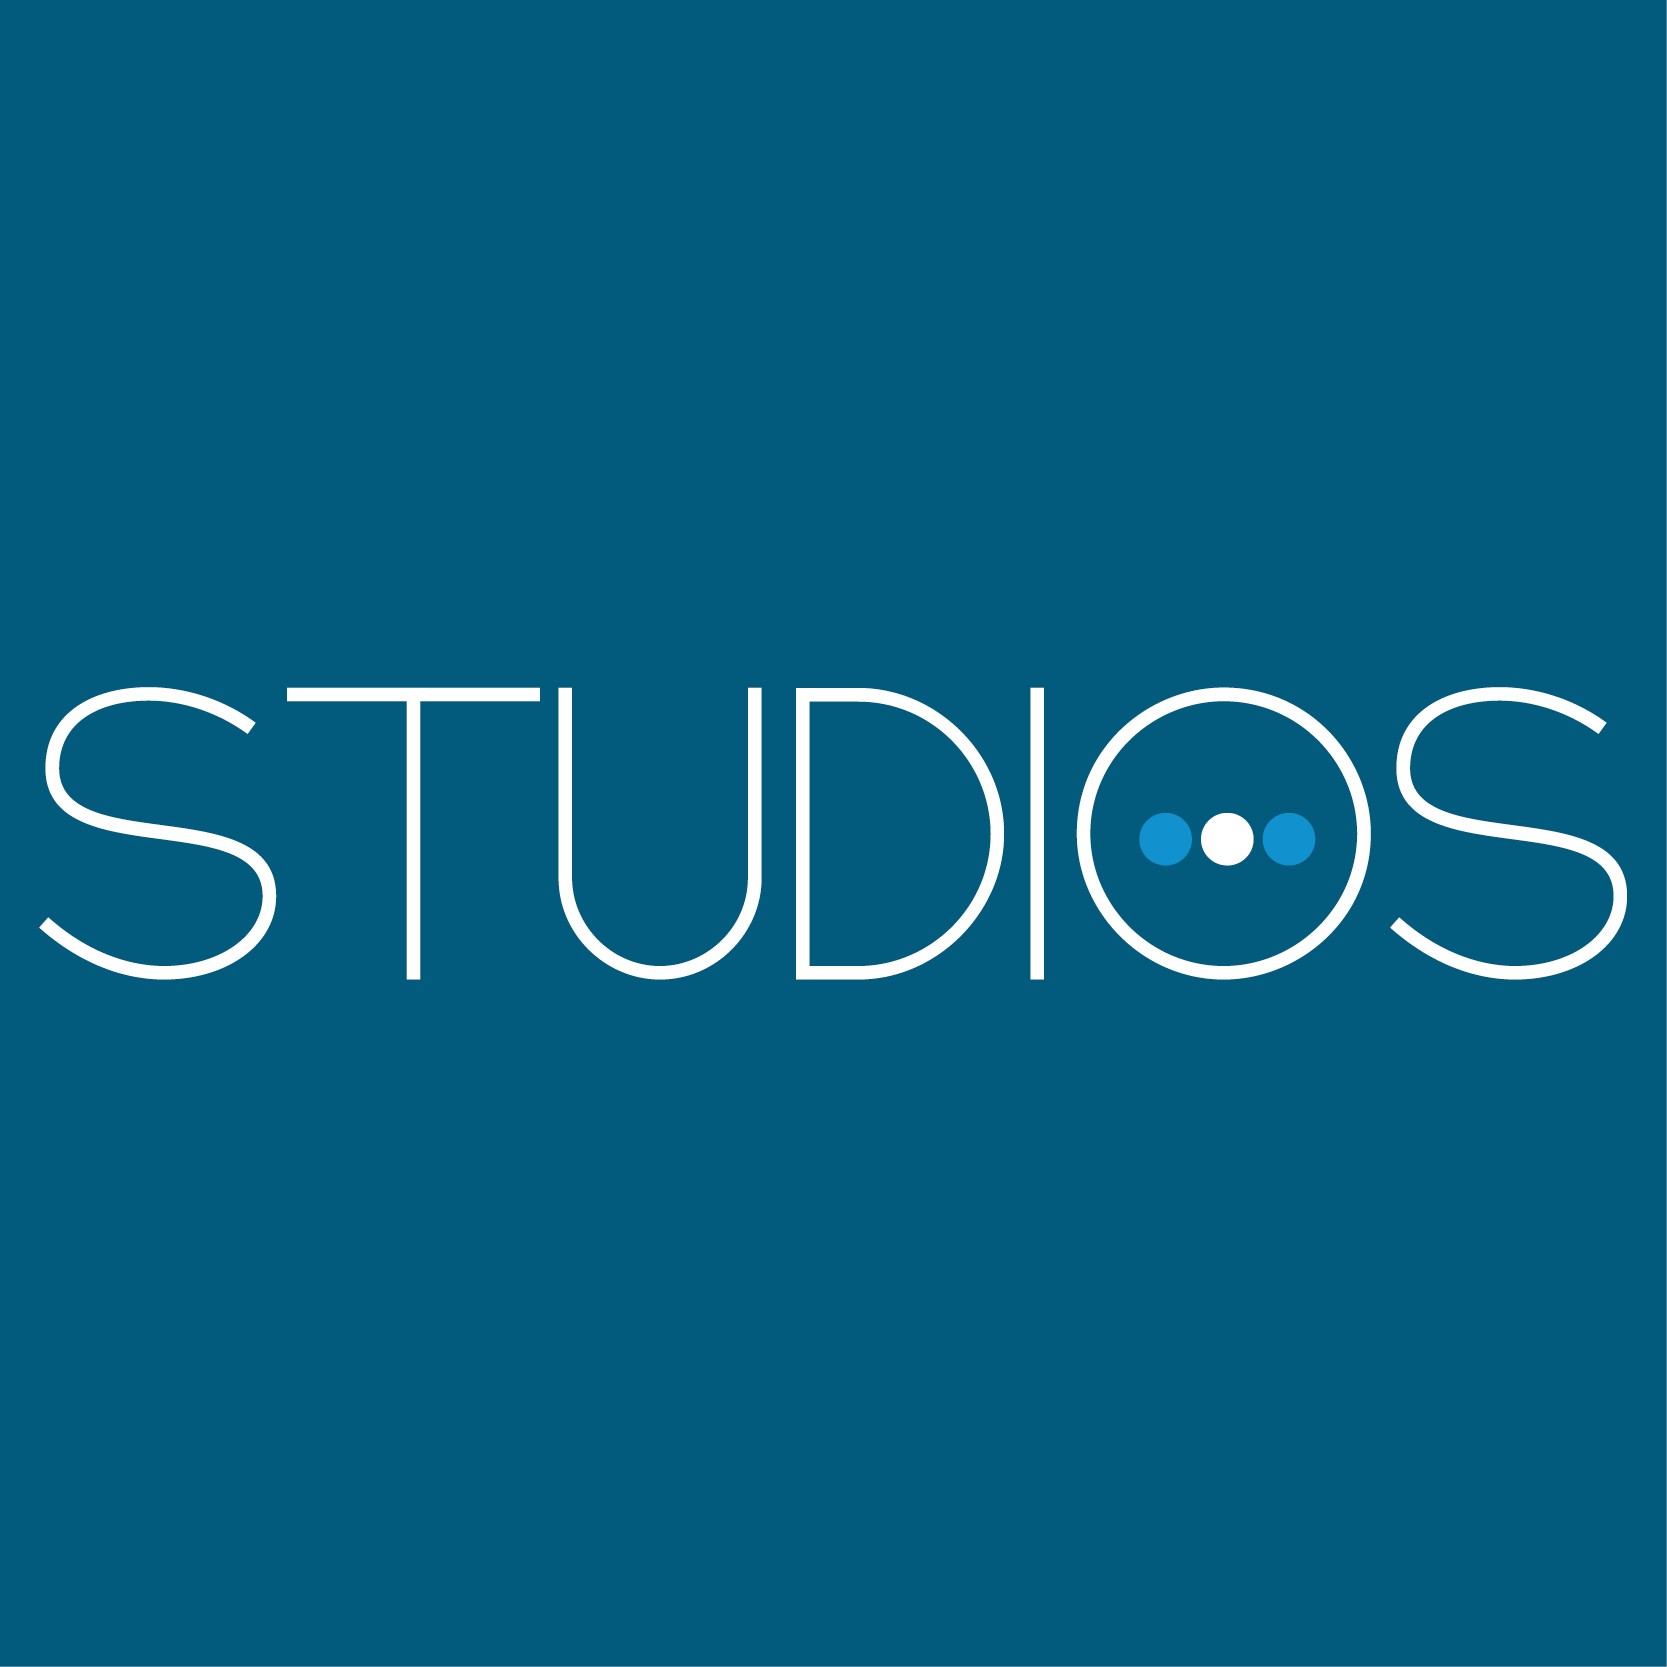 Bringing a New Business to Life: The People Behind Studios